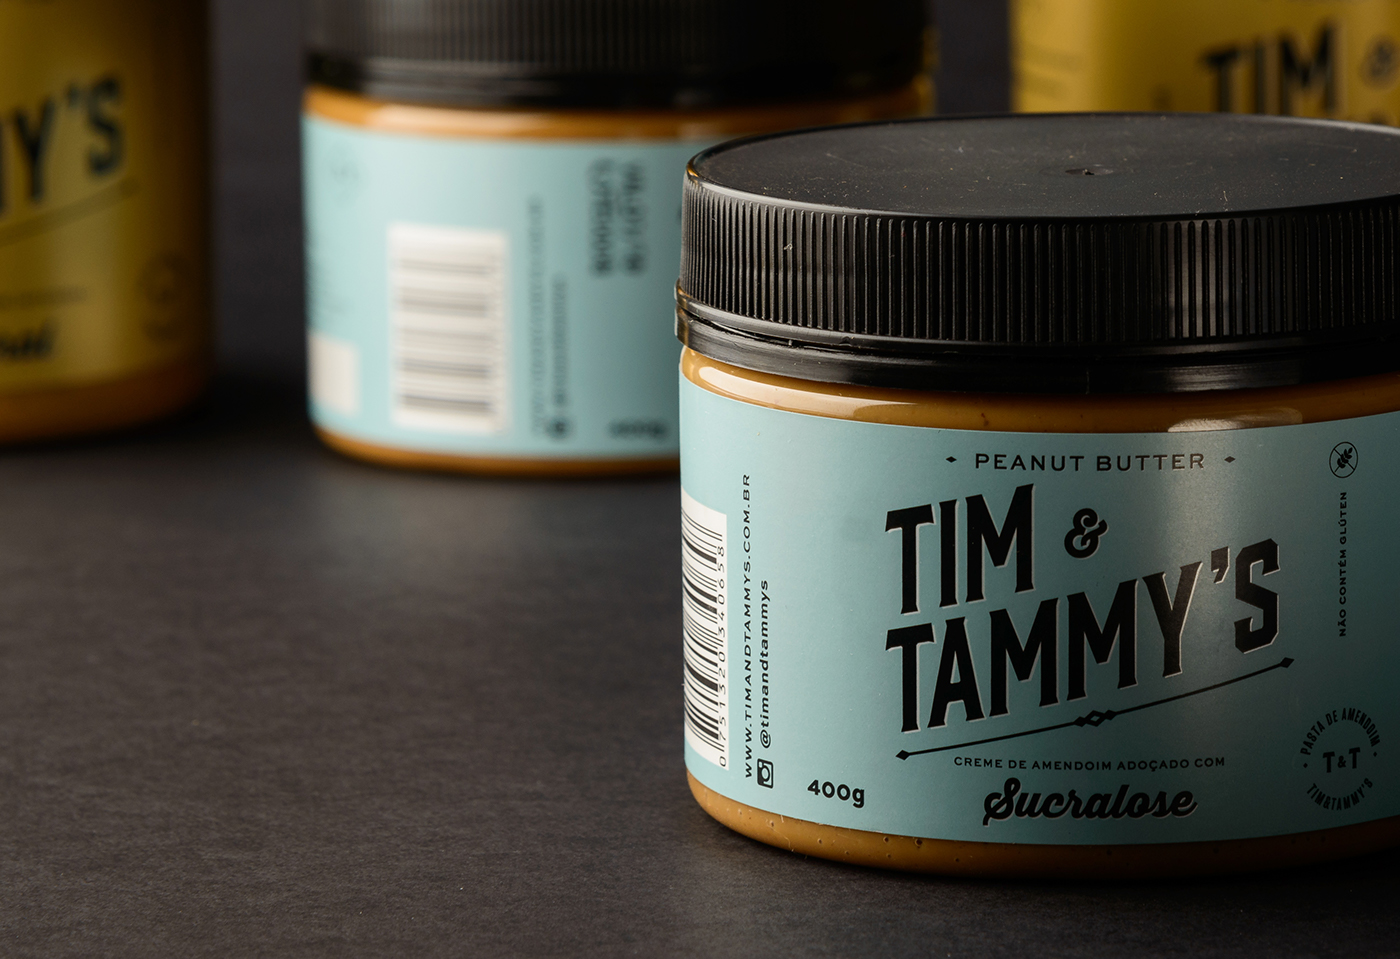 Packaging example #465: Tim & Tammy's - Brand Packaging